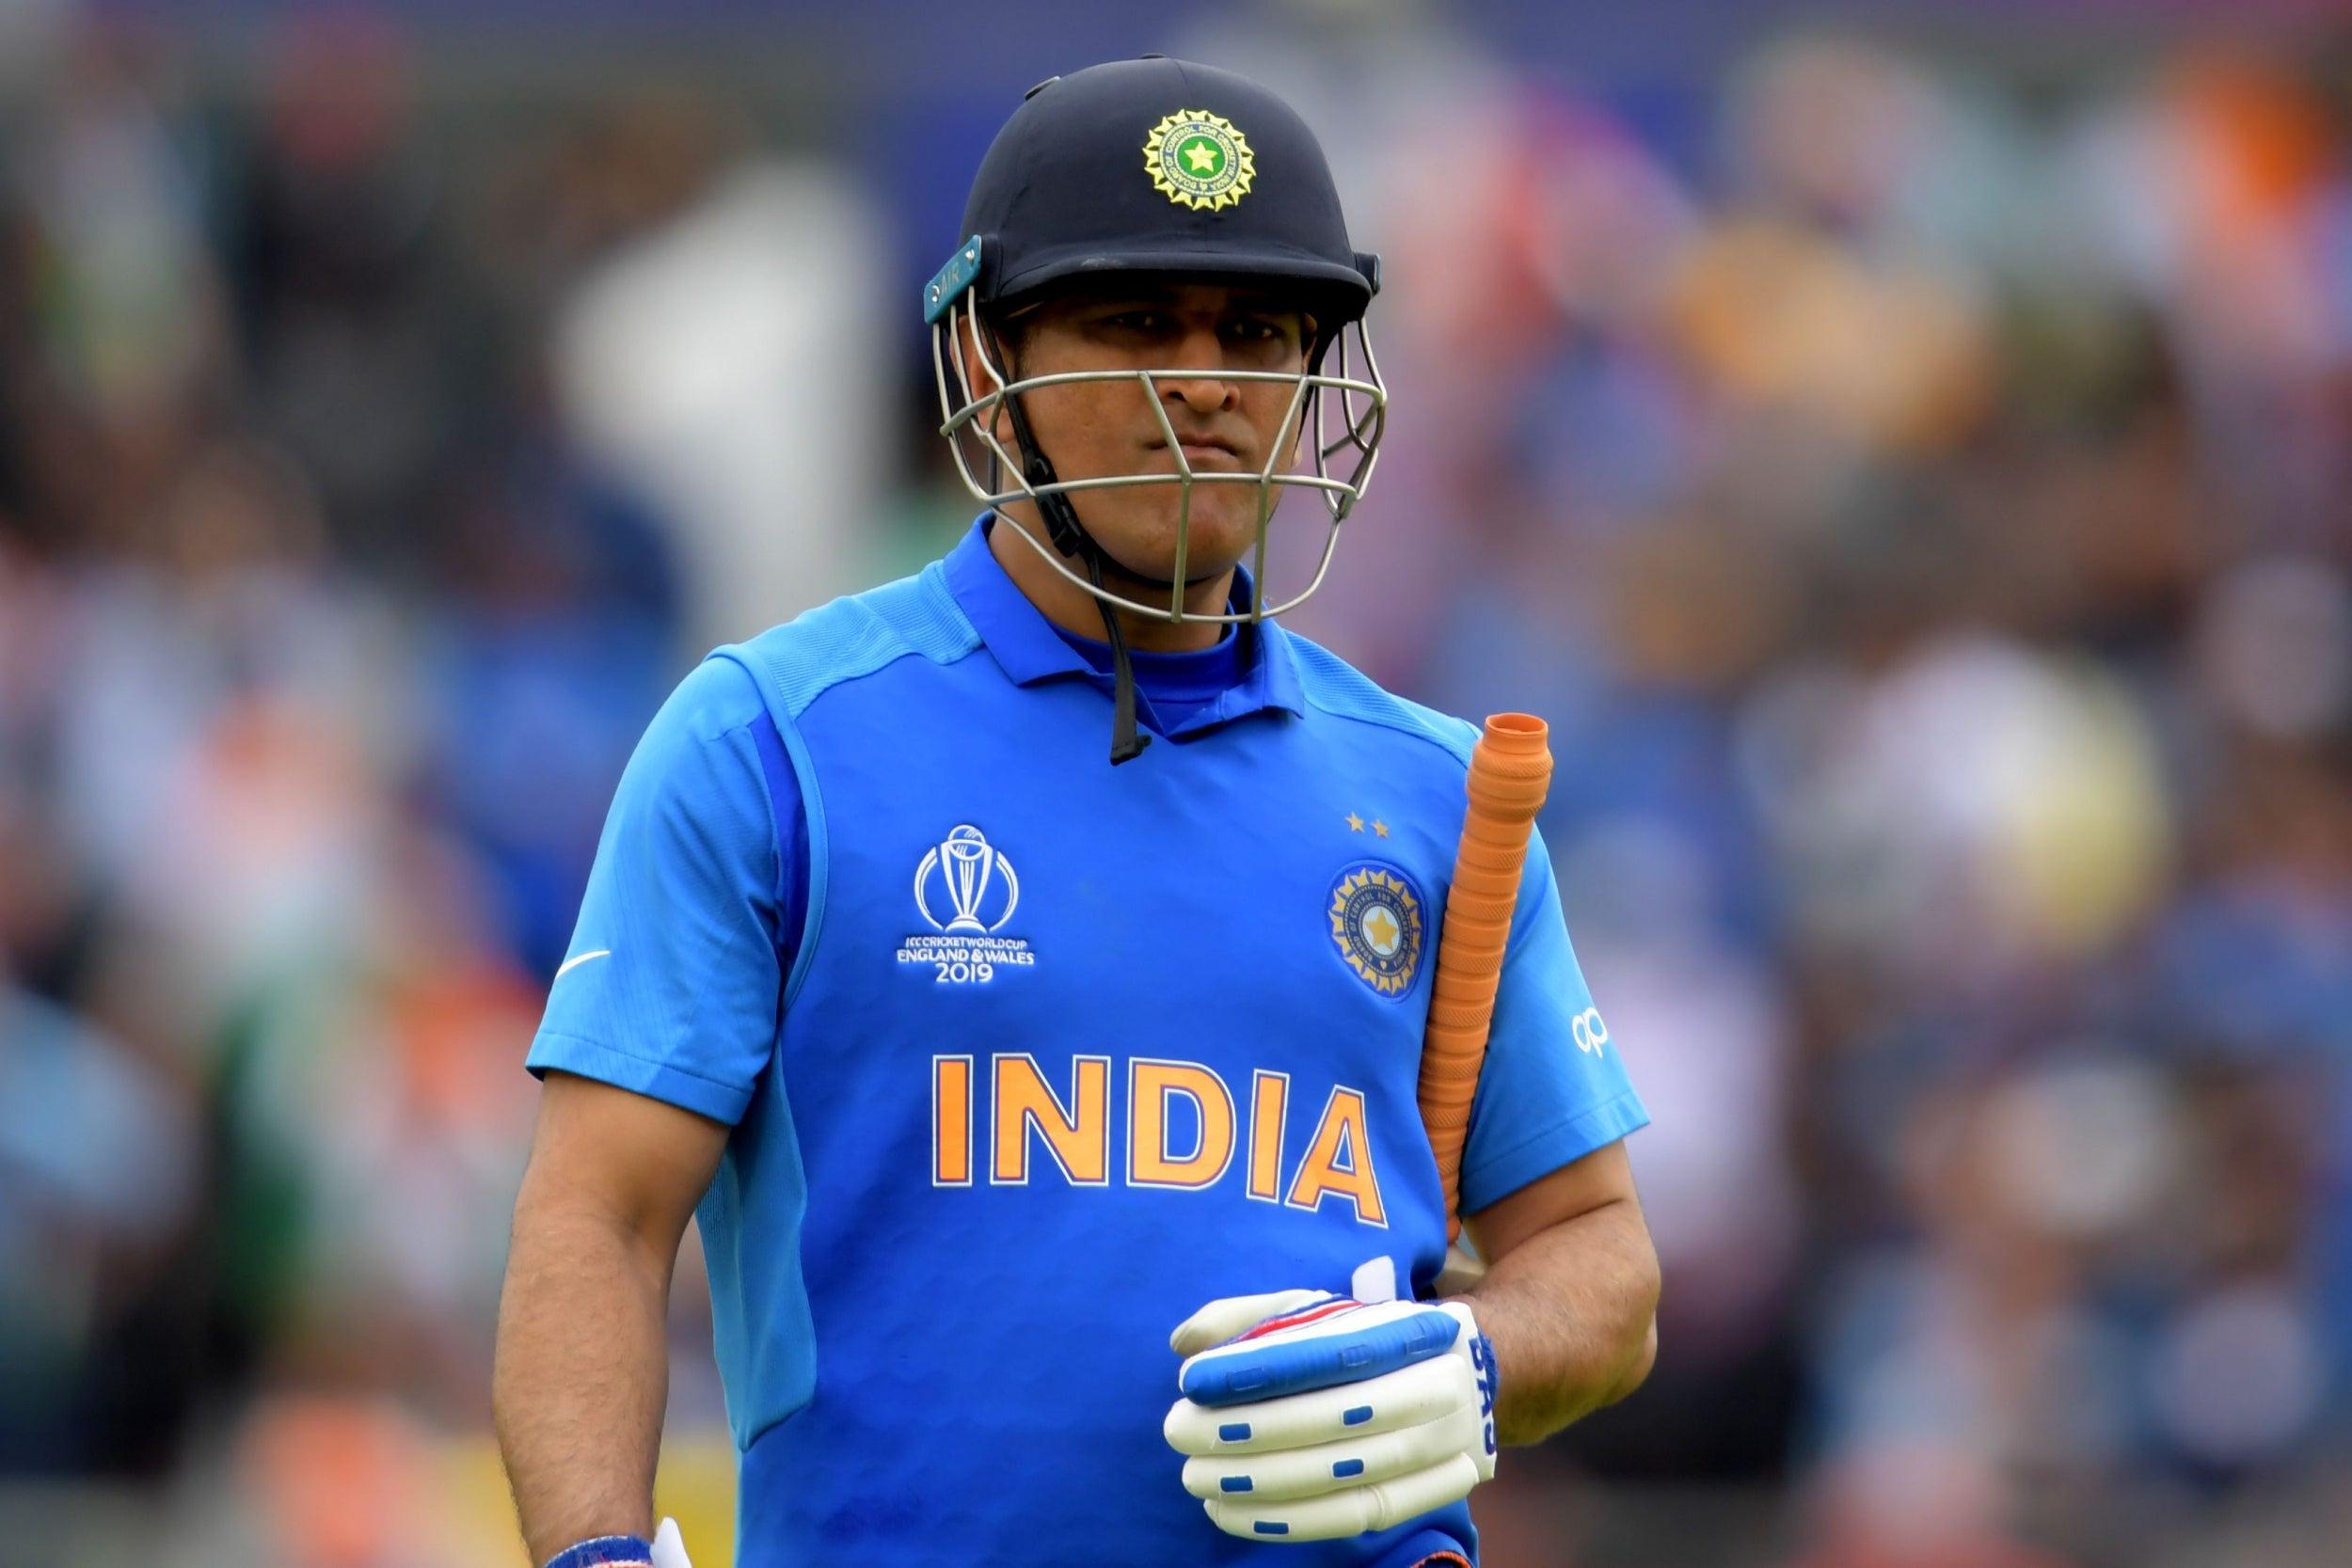 Cricket World Cup 2019: New Zealand shred logic as India